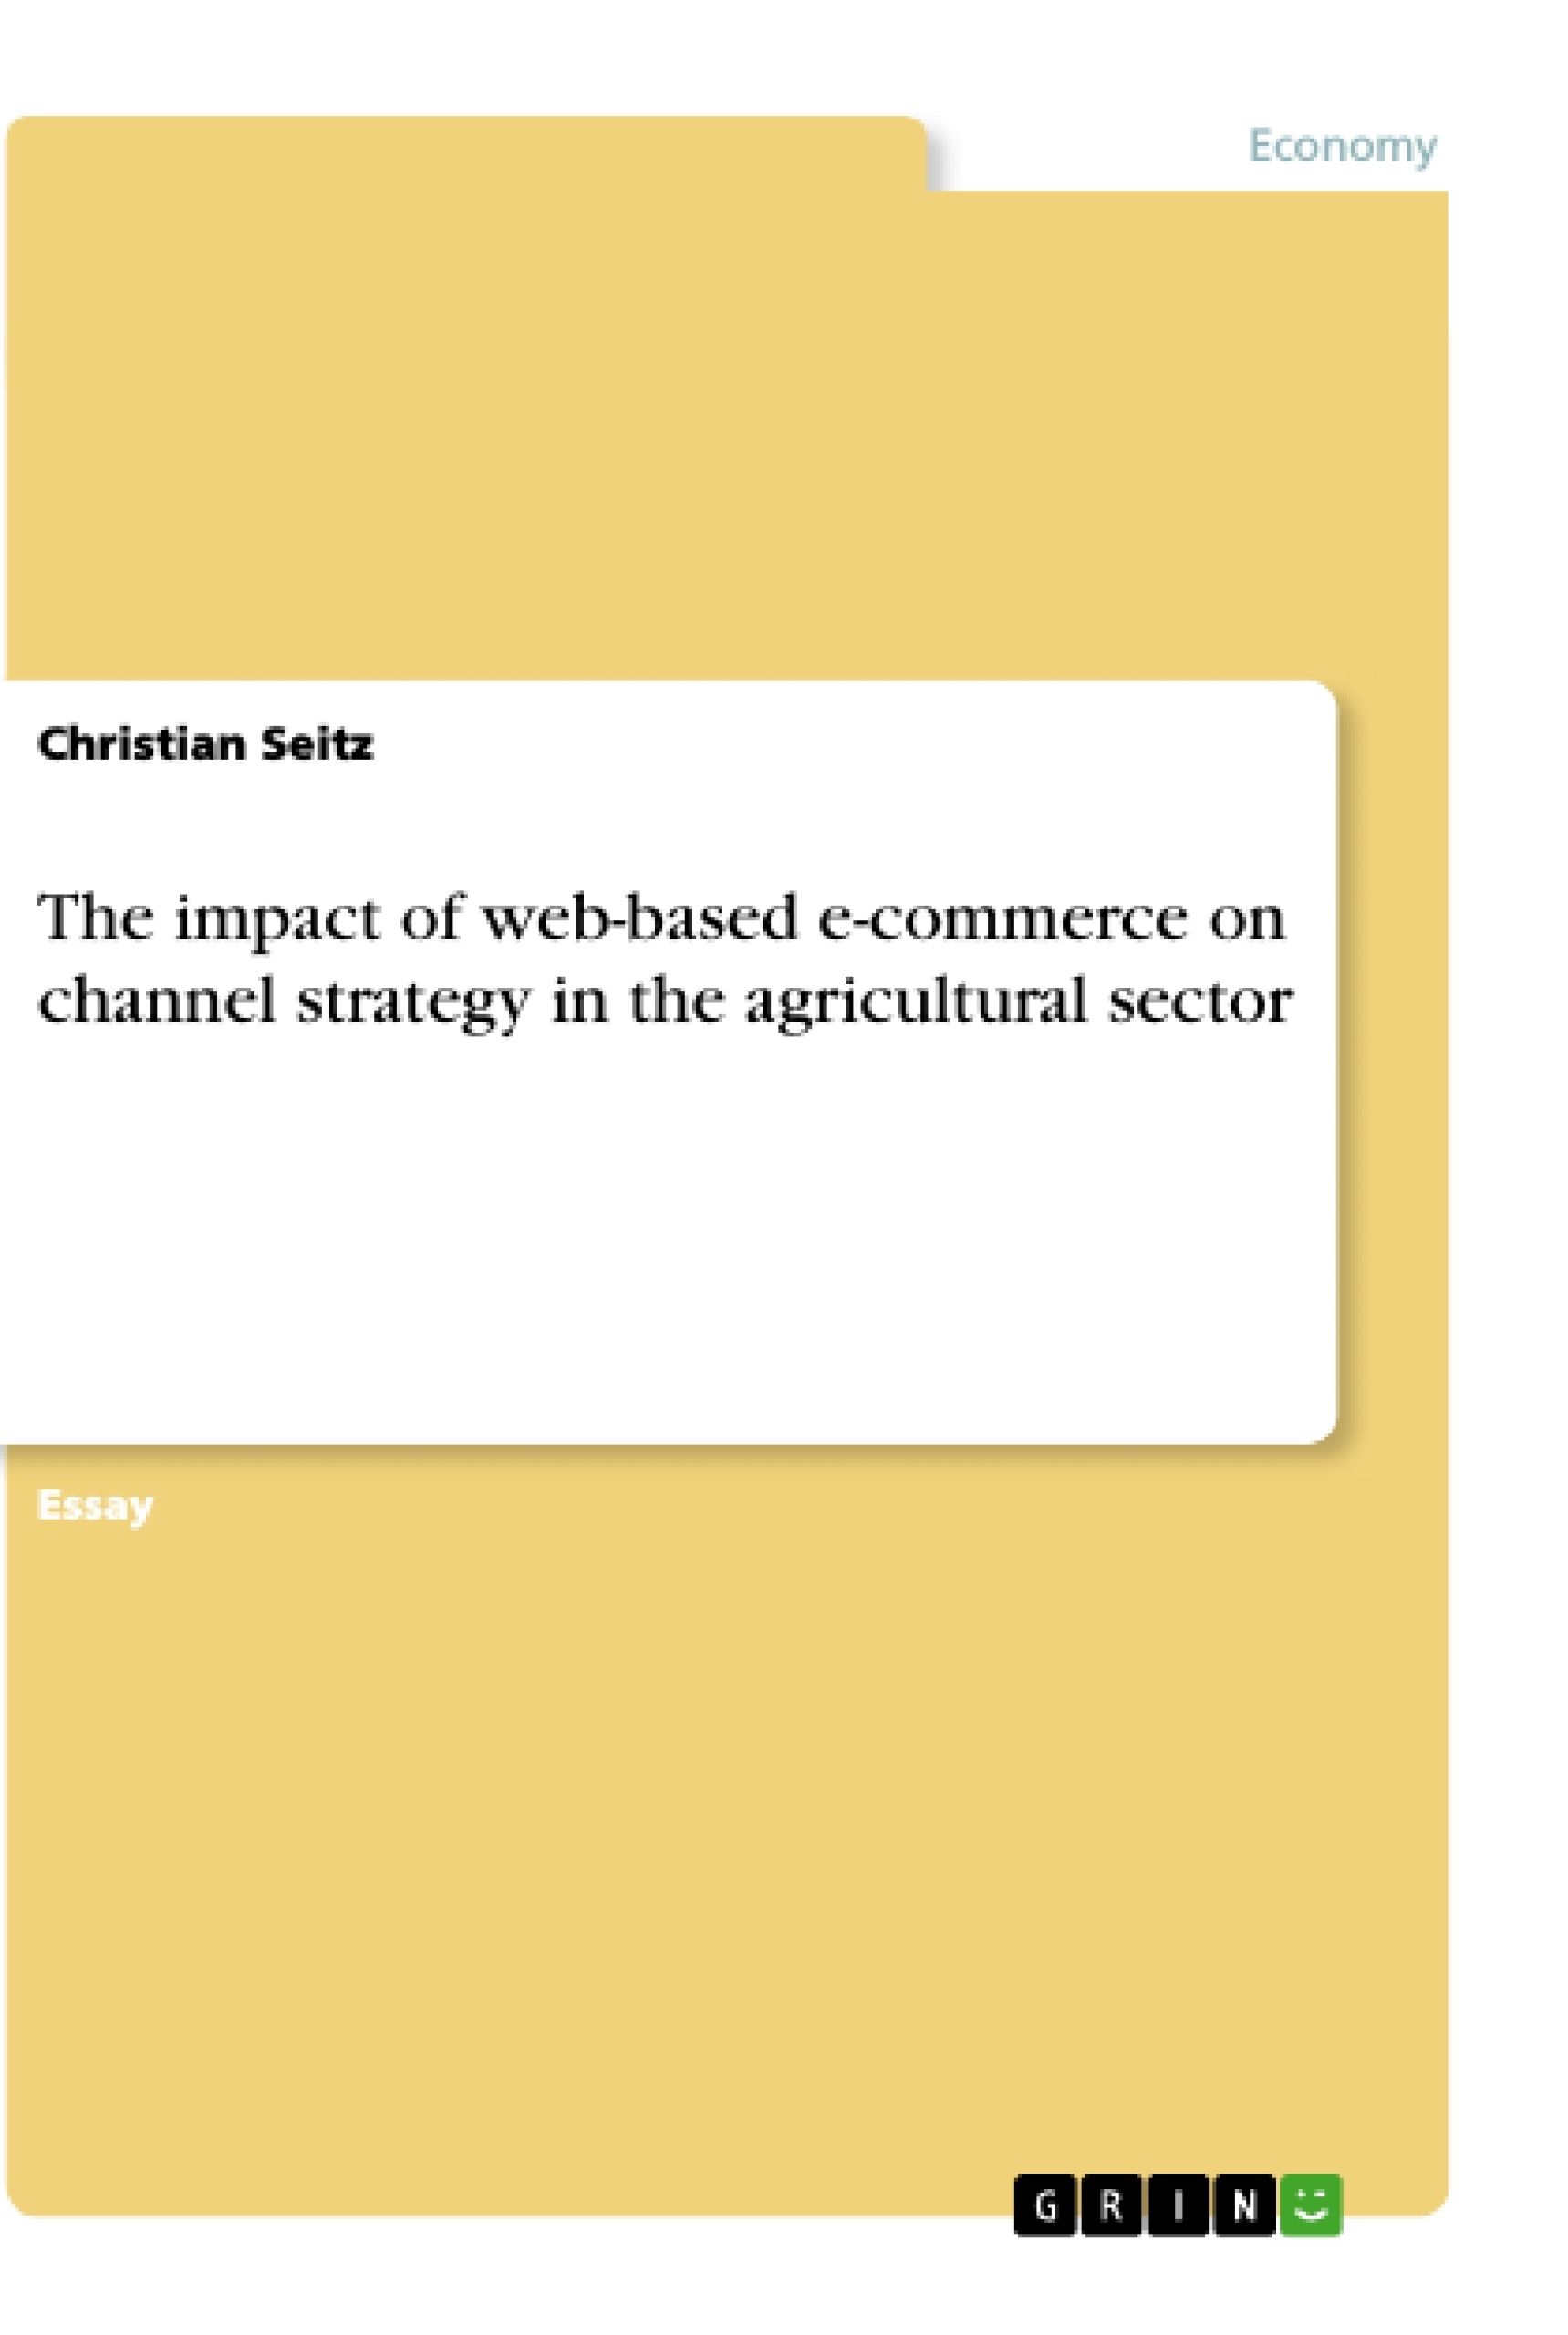 Titre: The impact of web-based e-commerce on channel strategy in the agricultural sector